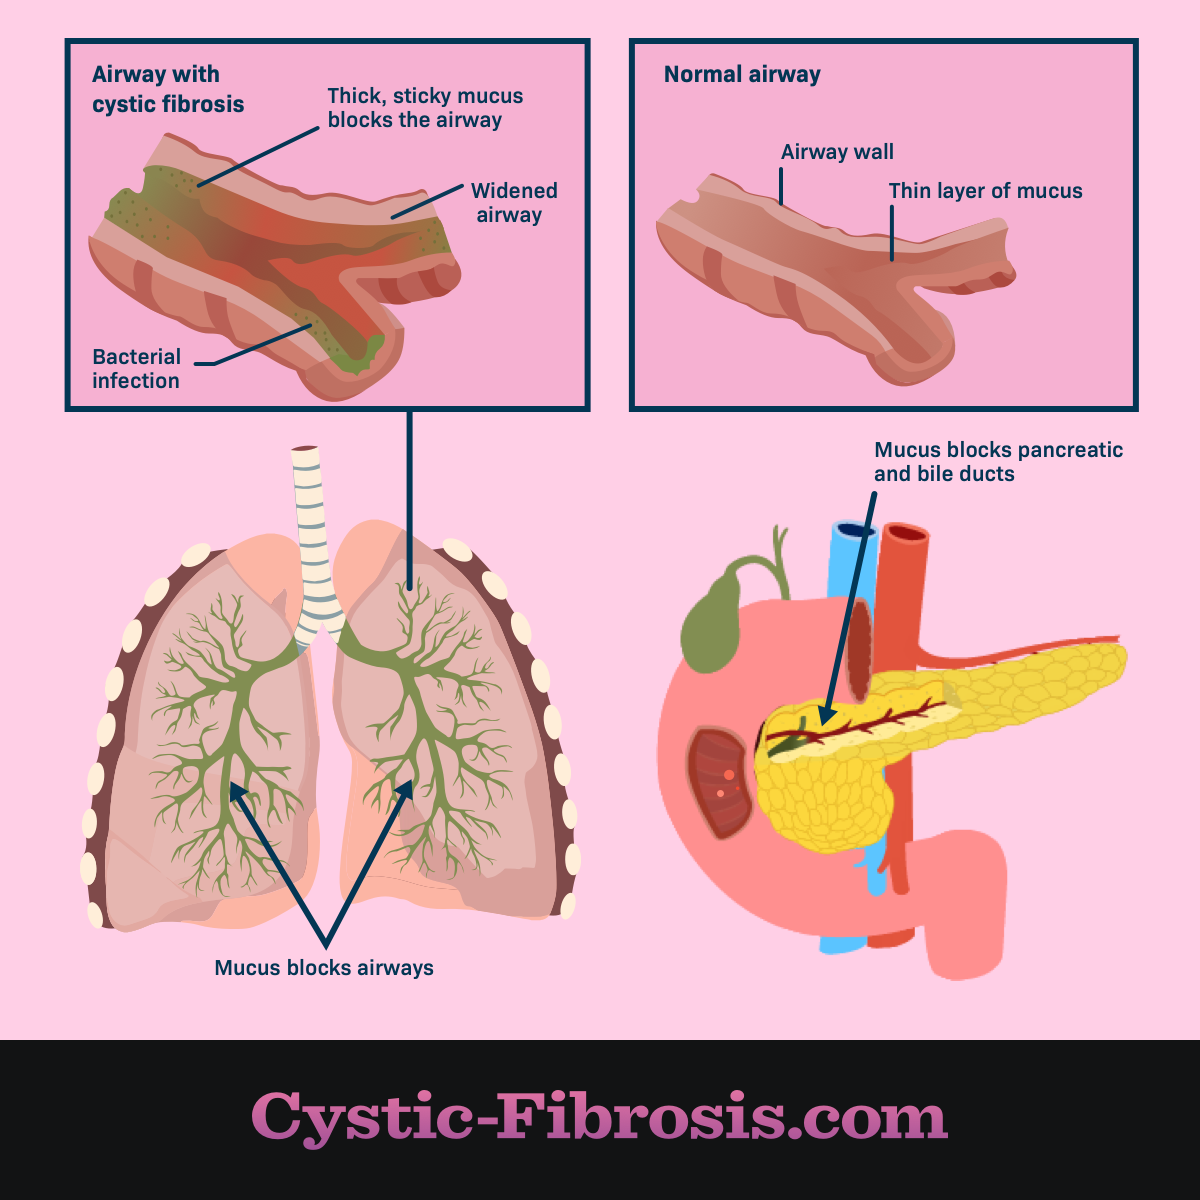 cystic fibrosis lung passageway compared to a normal airway